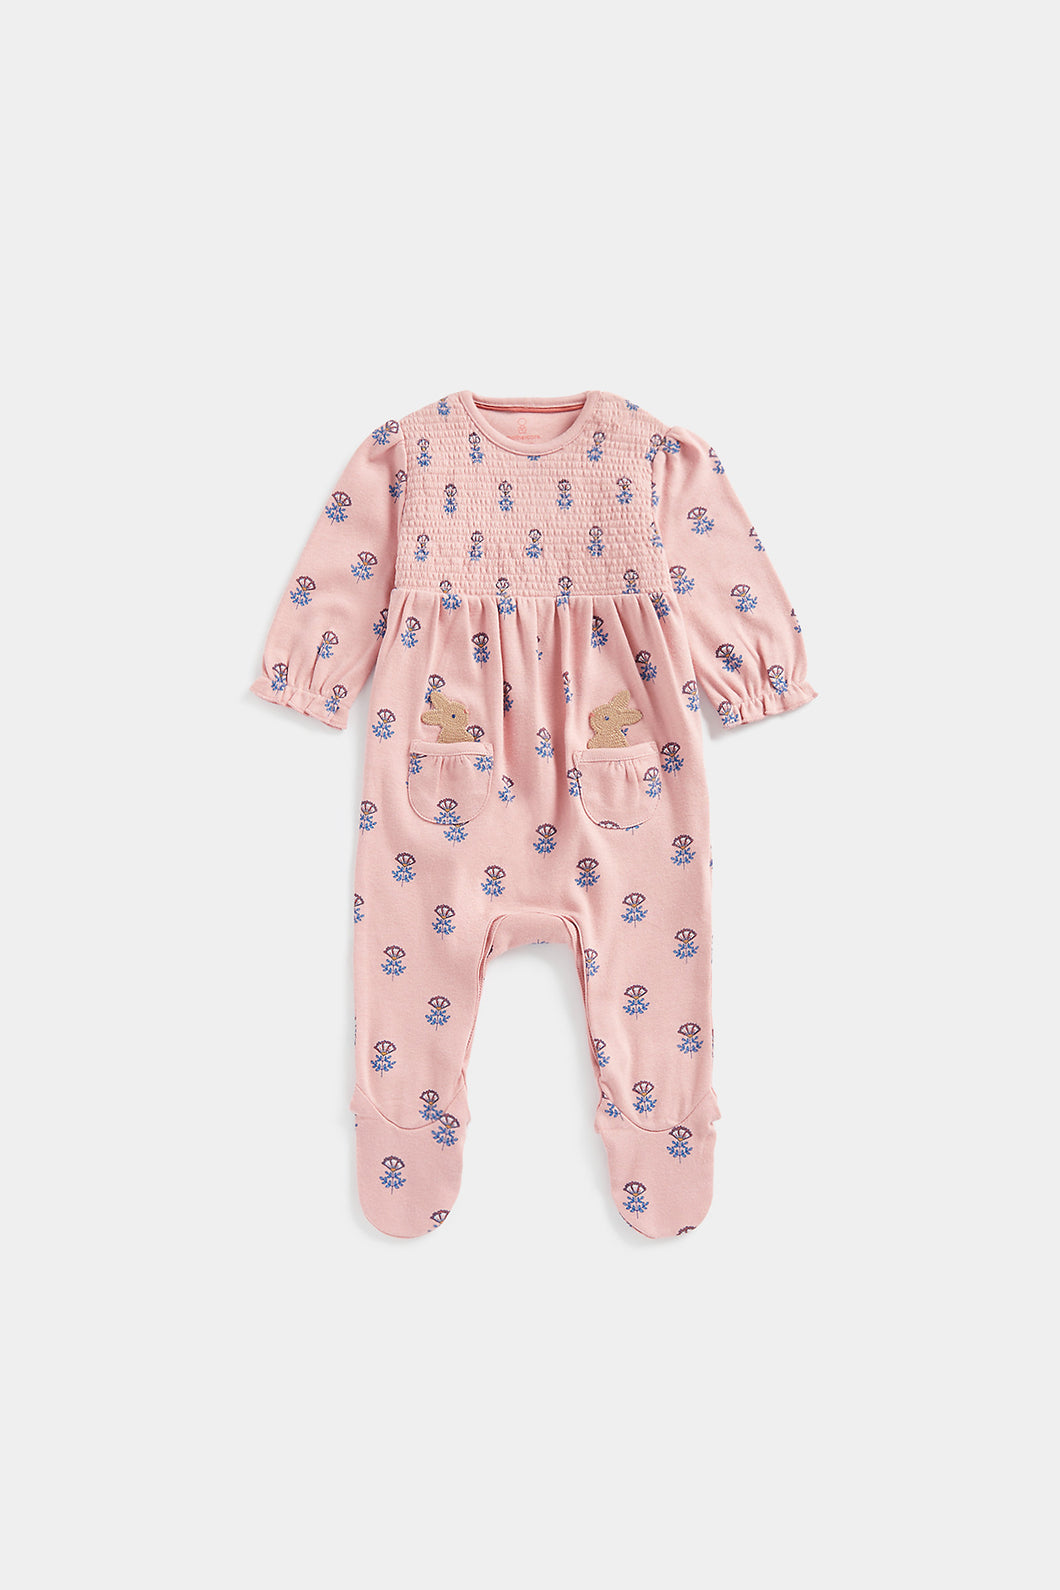 Mothercare Pink Smocked All-in-One